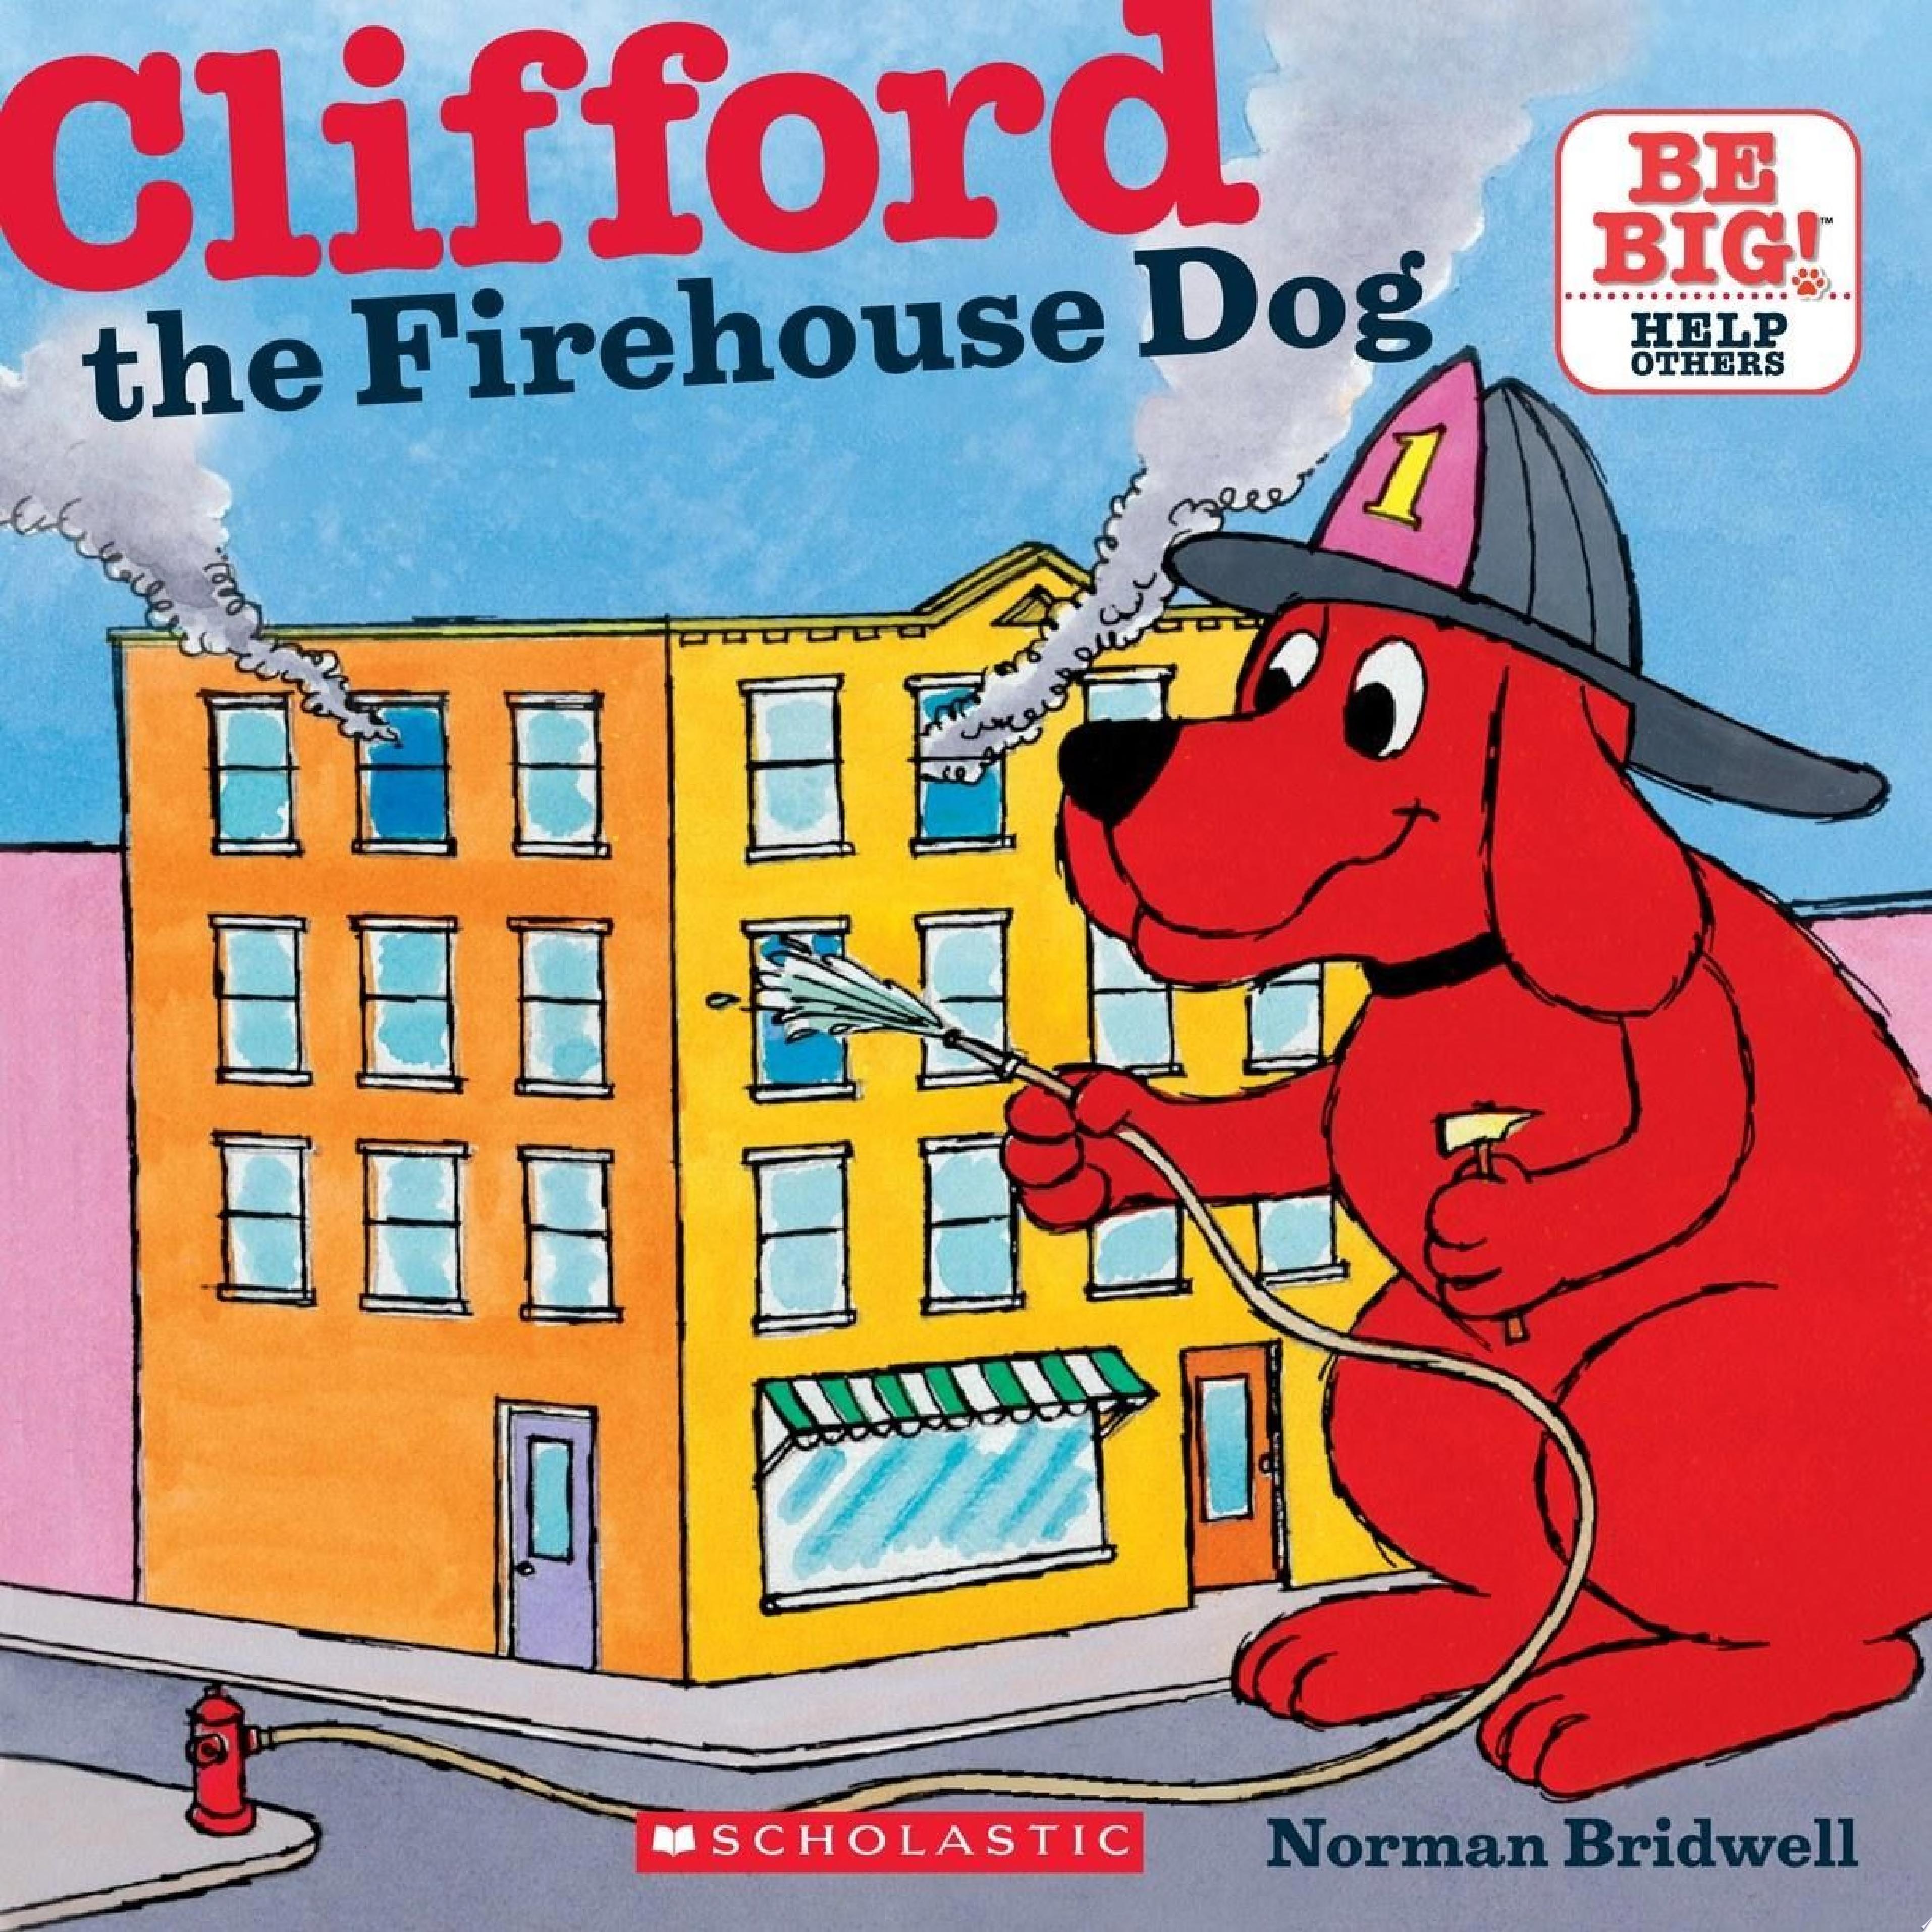 Image for "Clifford the Firehouse Dog (Classic Storybook)"